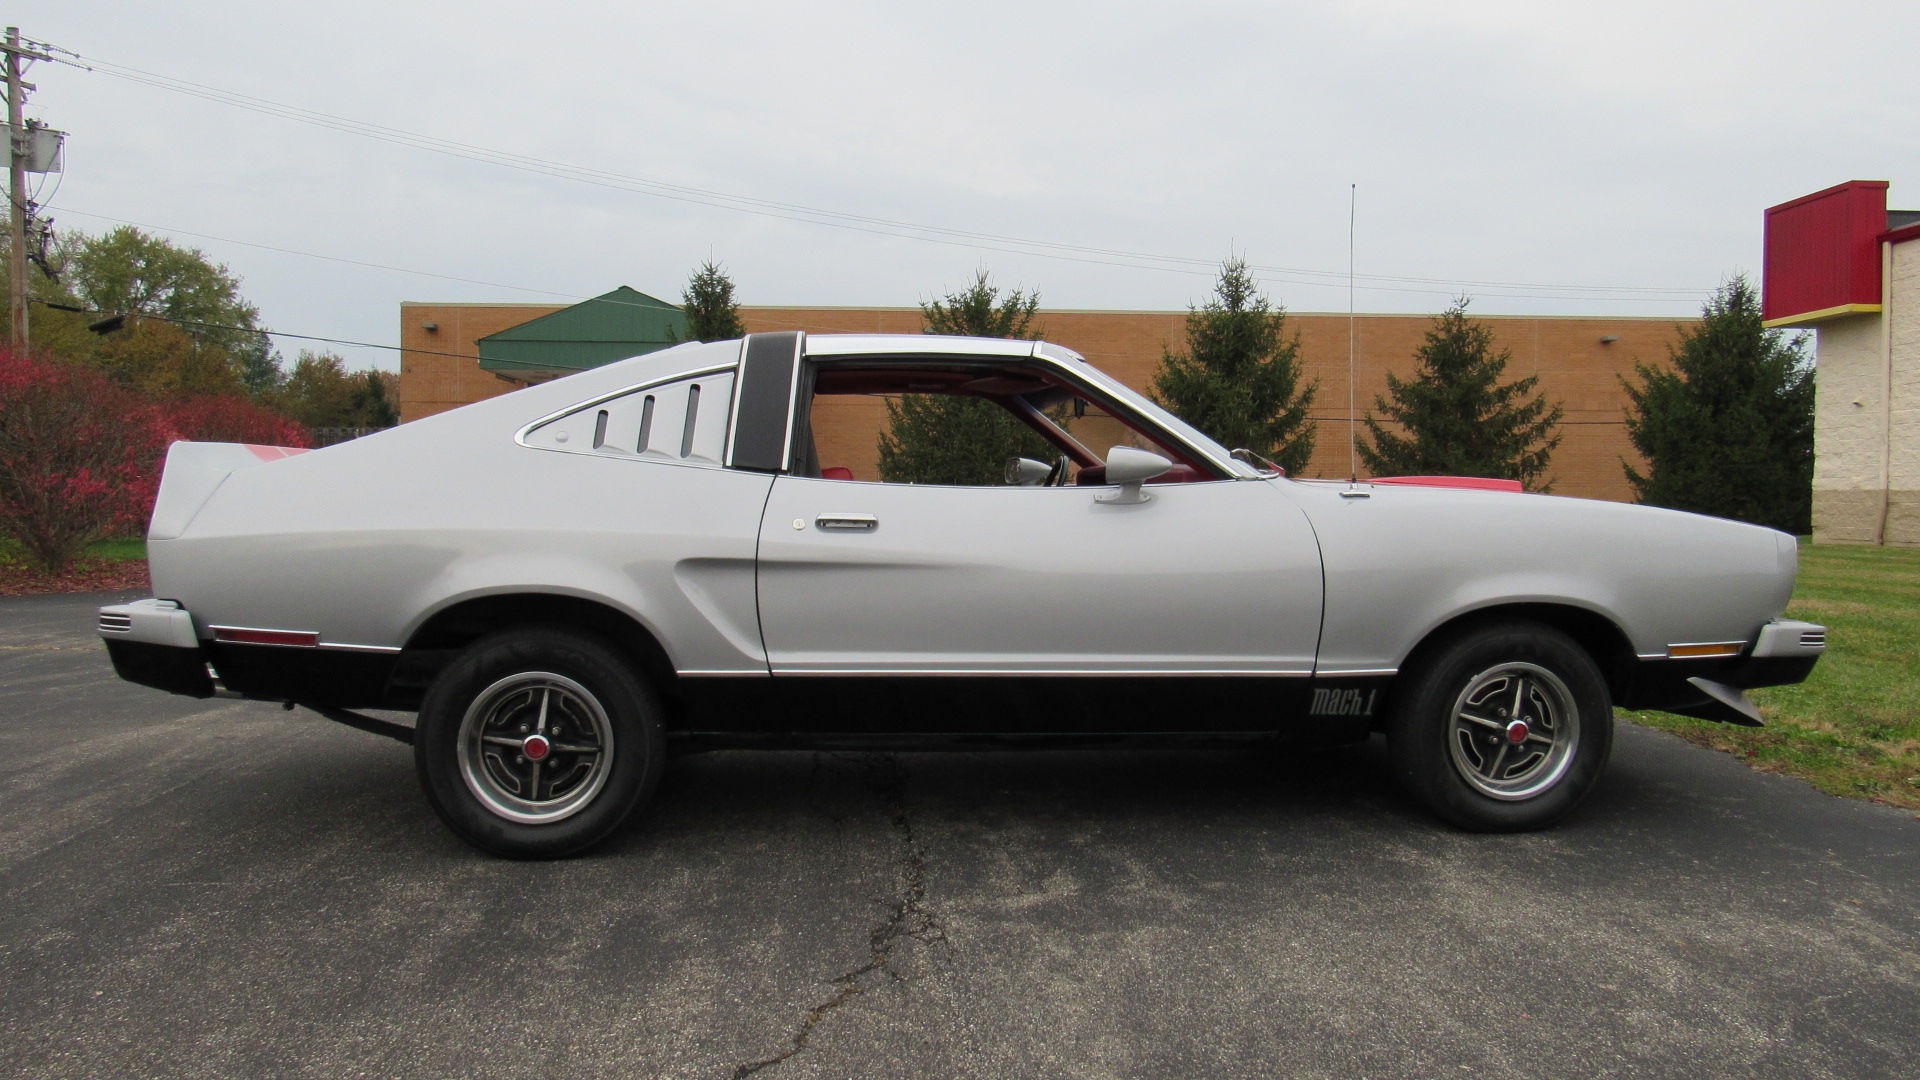 1978 Mustang, 4 Speed, T-Tops, SOLD!